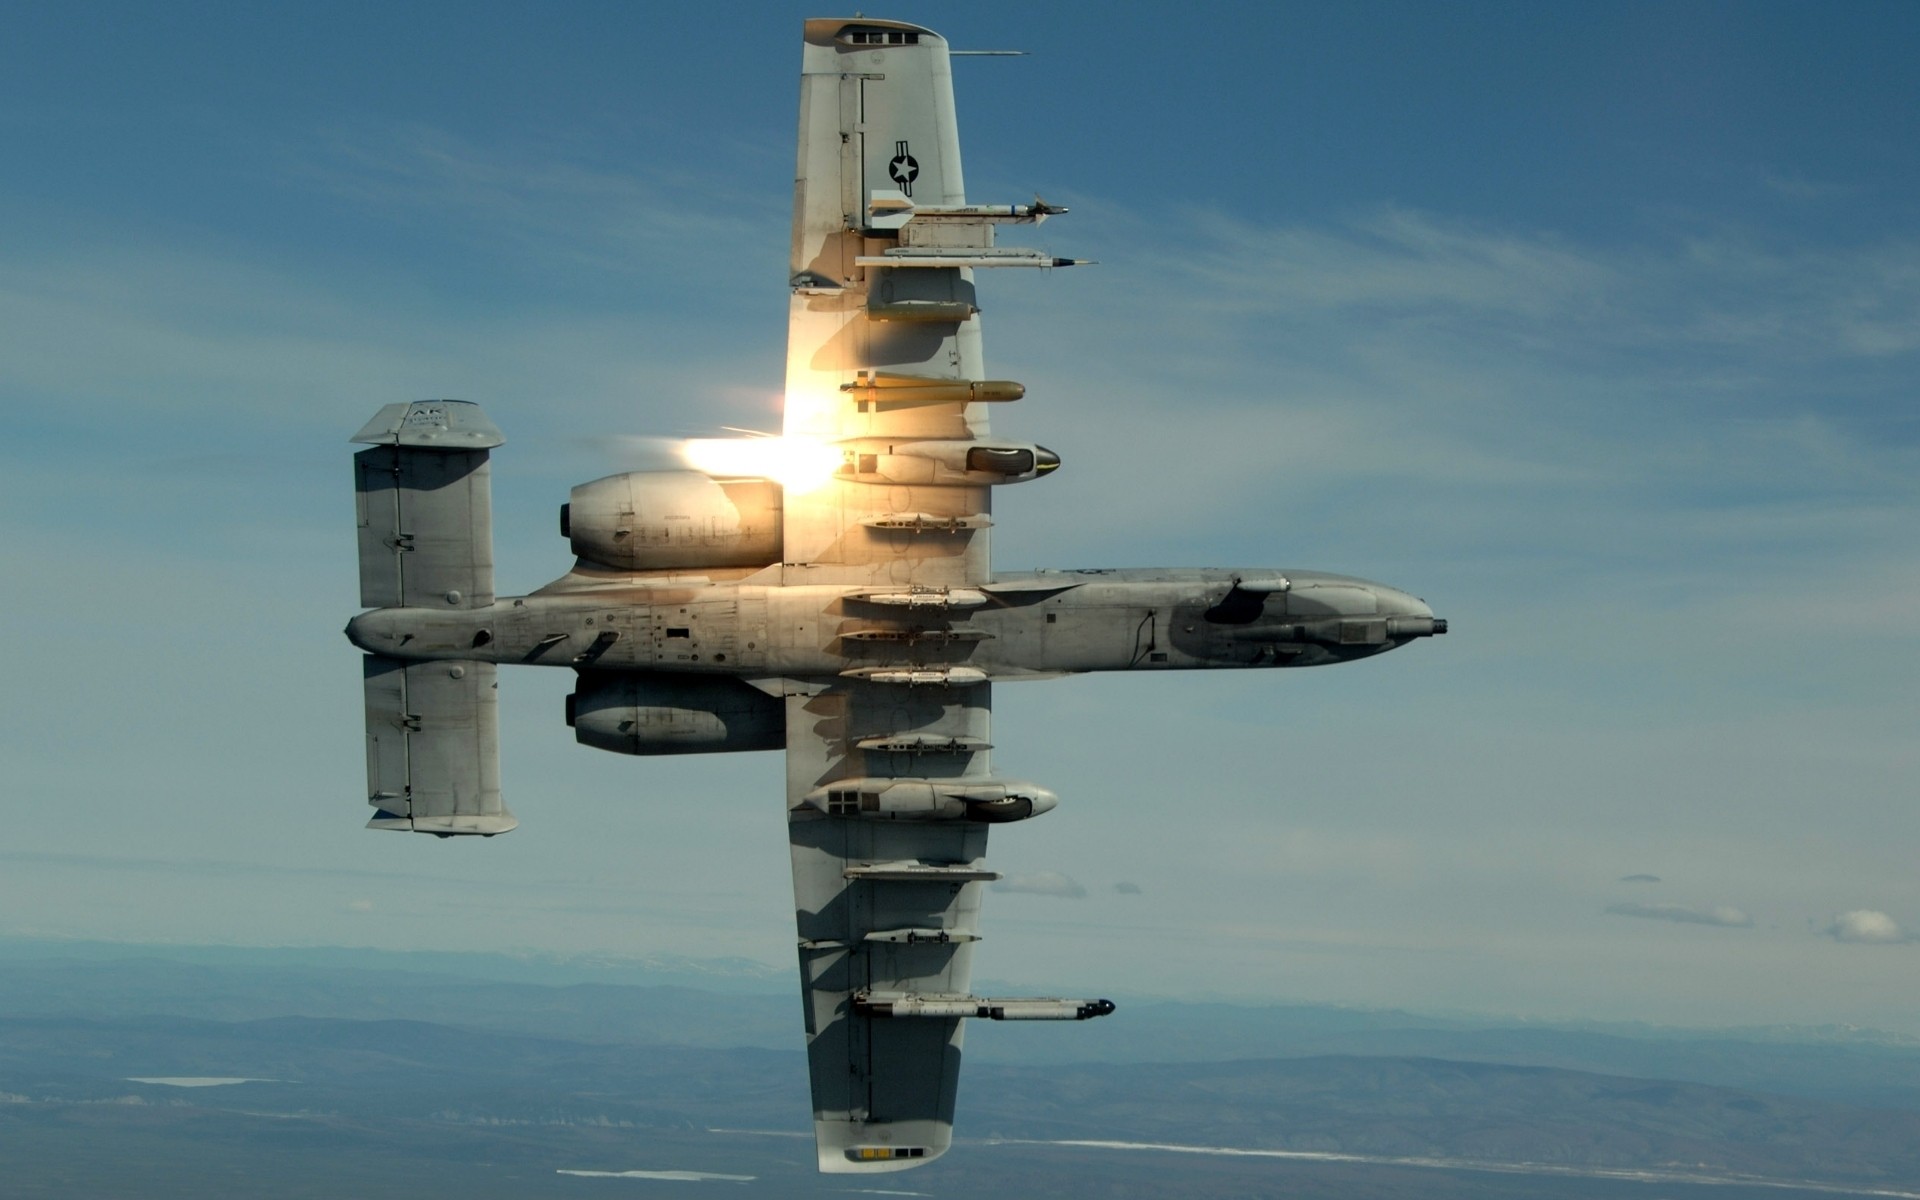 General 1920x1200 aircraft military Fairchild Republic A-10 Thunderbolt II military aircraft vehicle American aircraft sky clouds military vehicle bottom view flying missiles